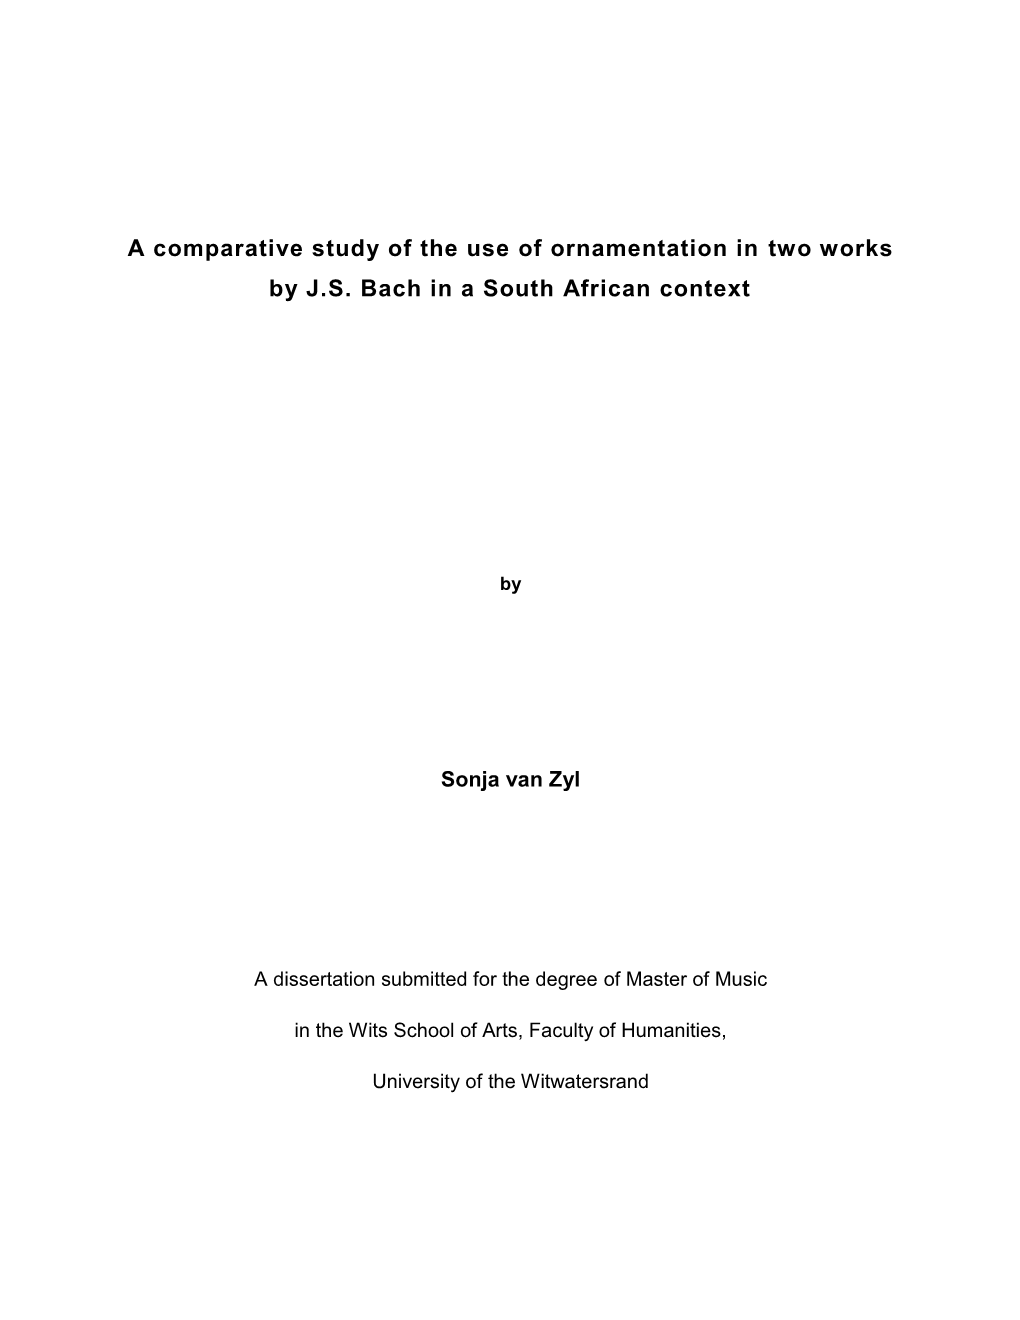 A Comparative Study of the Use of Ornamentation in Two Works by J.S. Bach in a South African Context